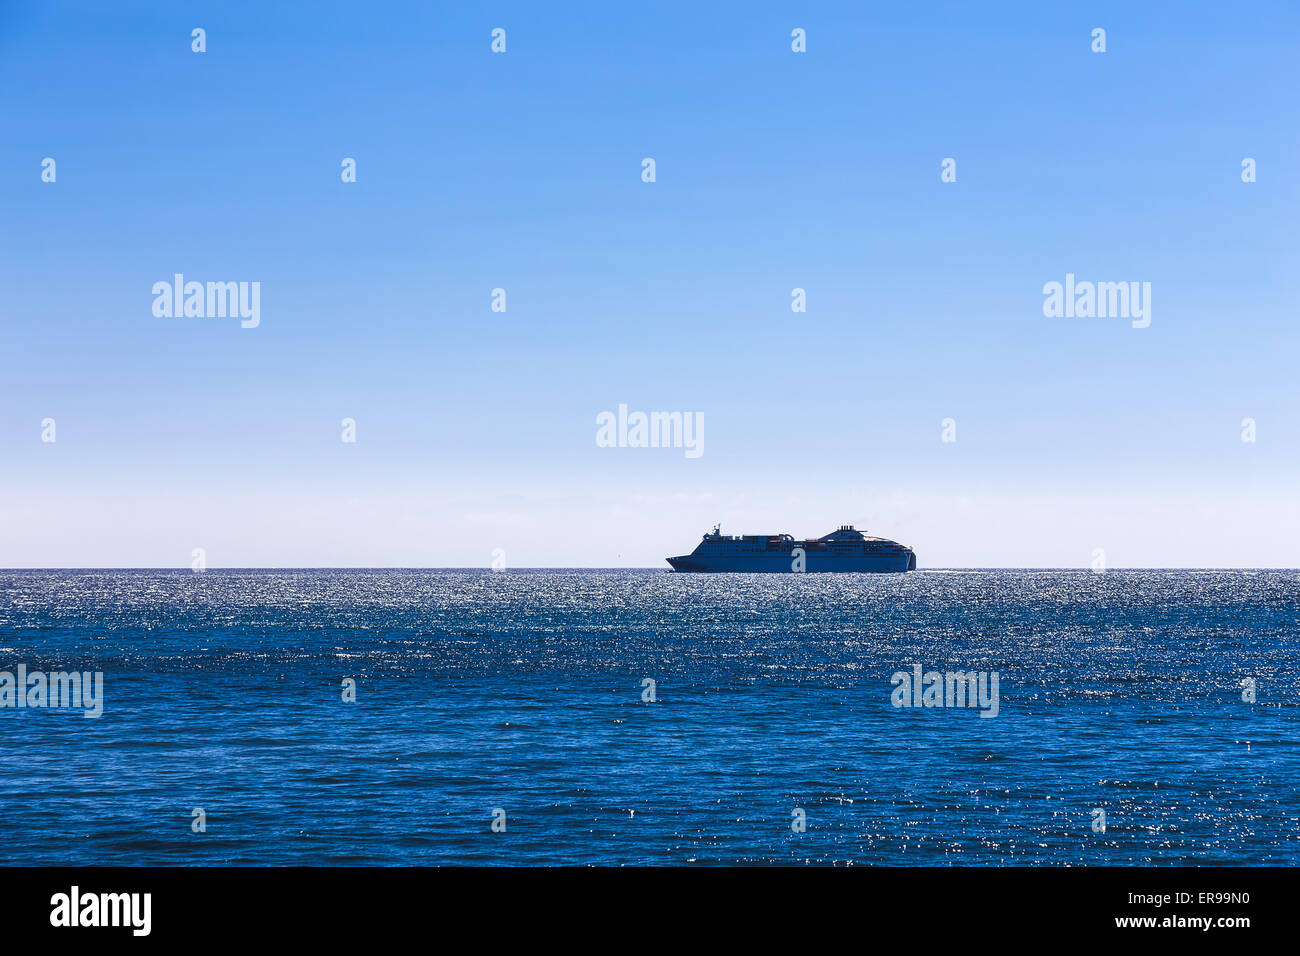 Cruise ship or liner in the open Atlantic ocean Stock Photo